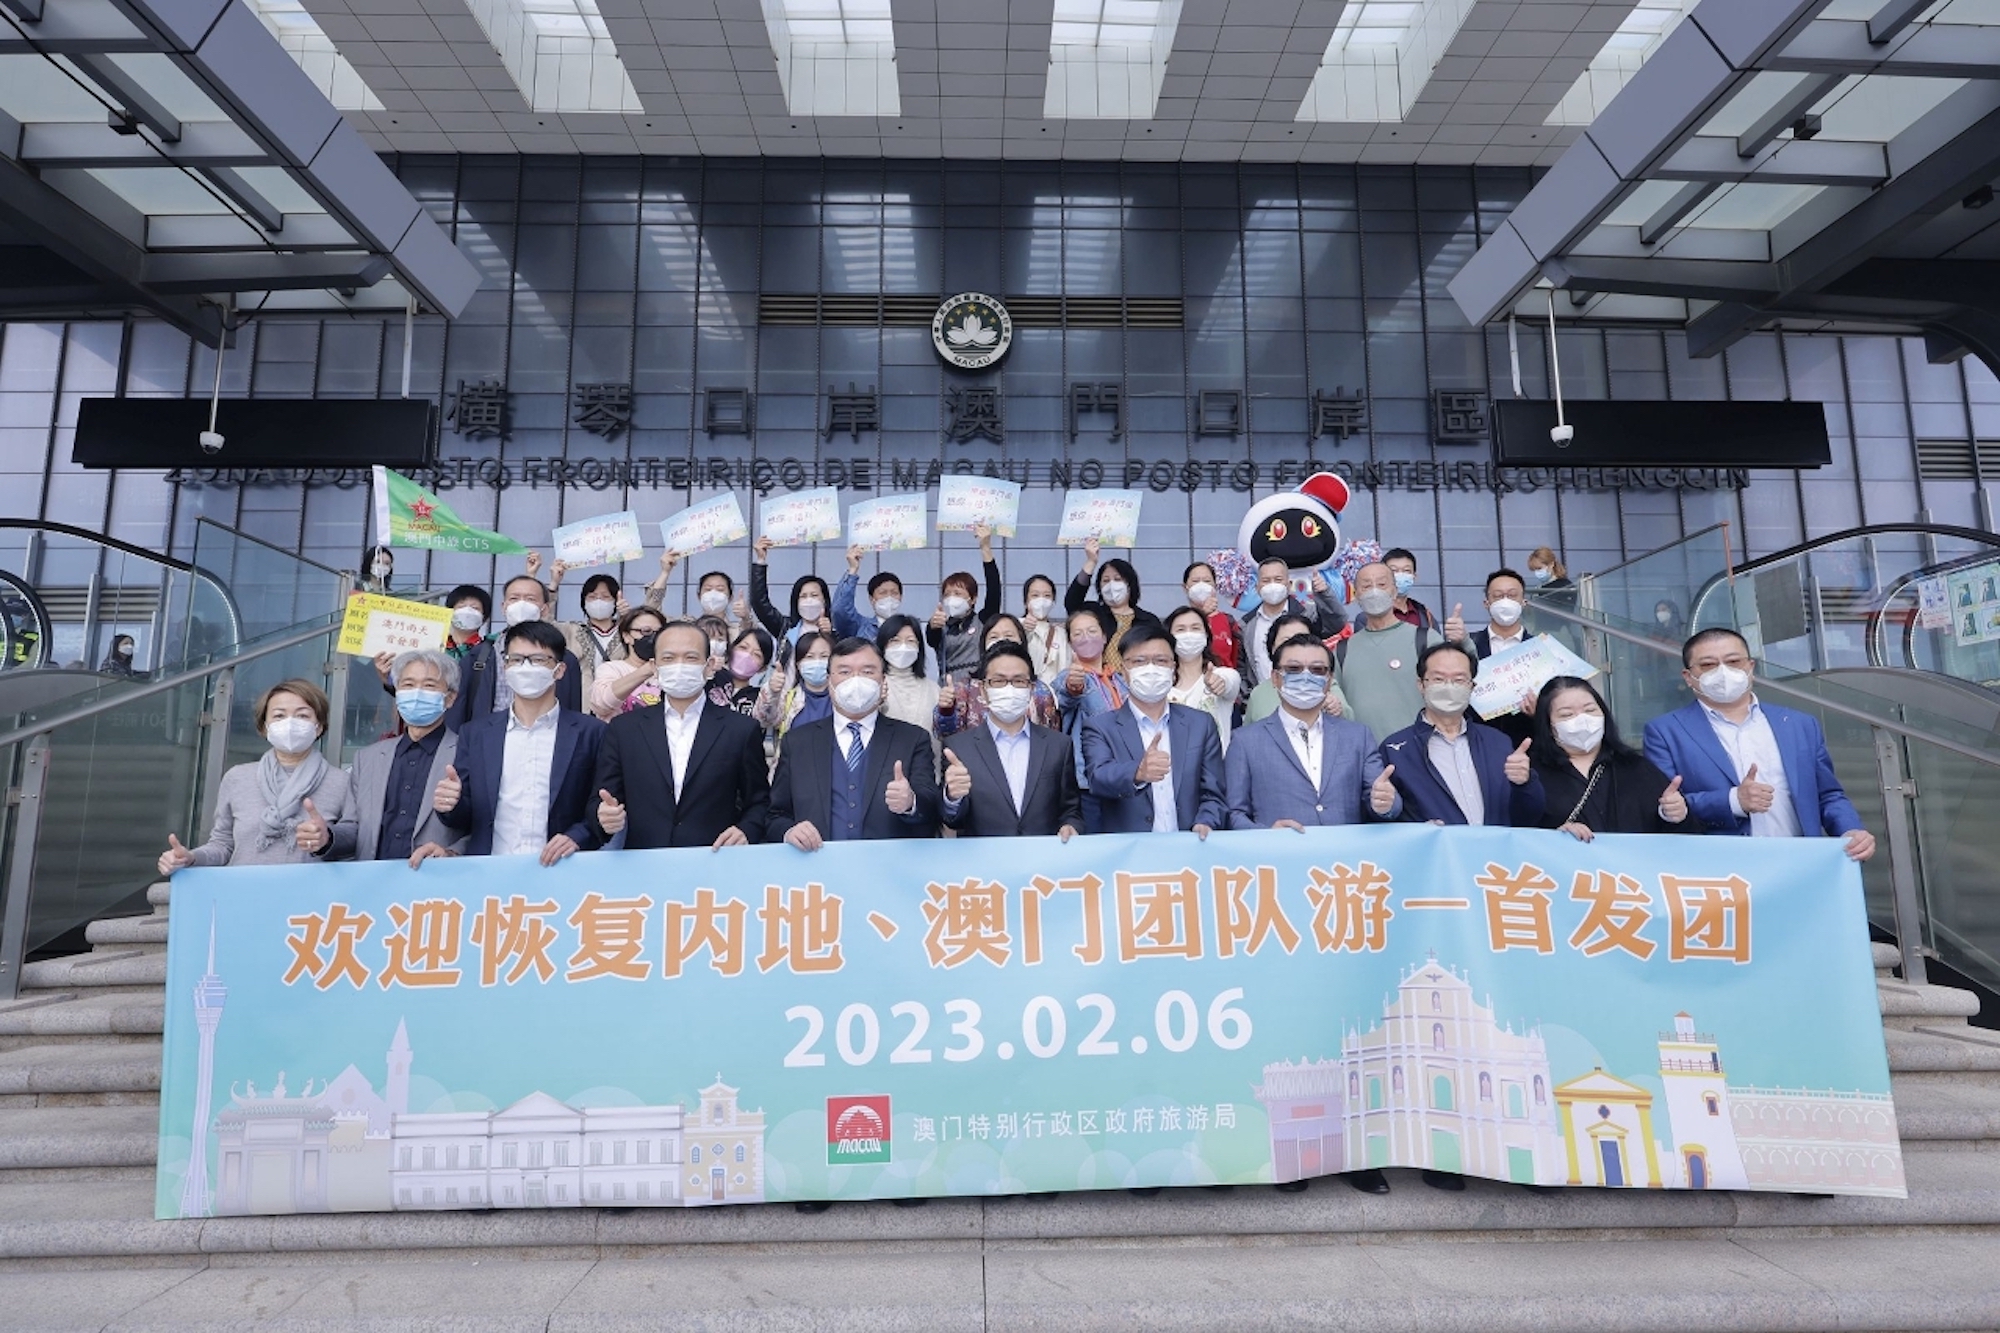 First tour groups from mainland China since 2020 arrive in Macao